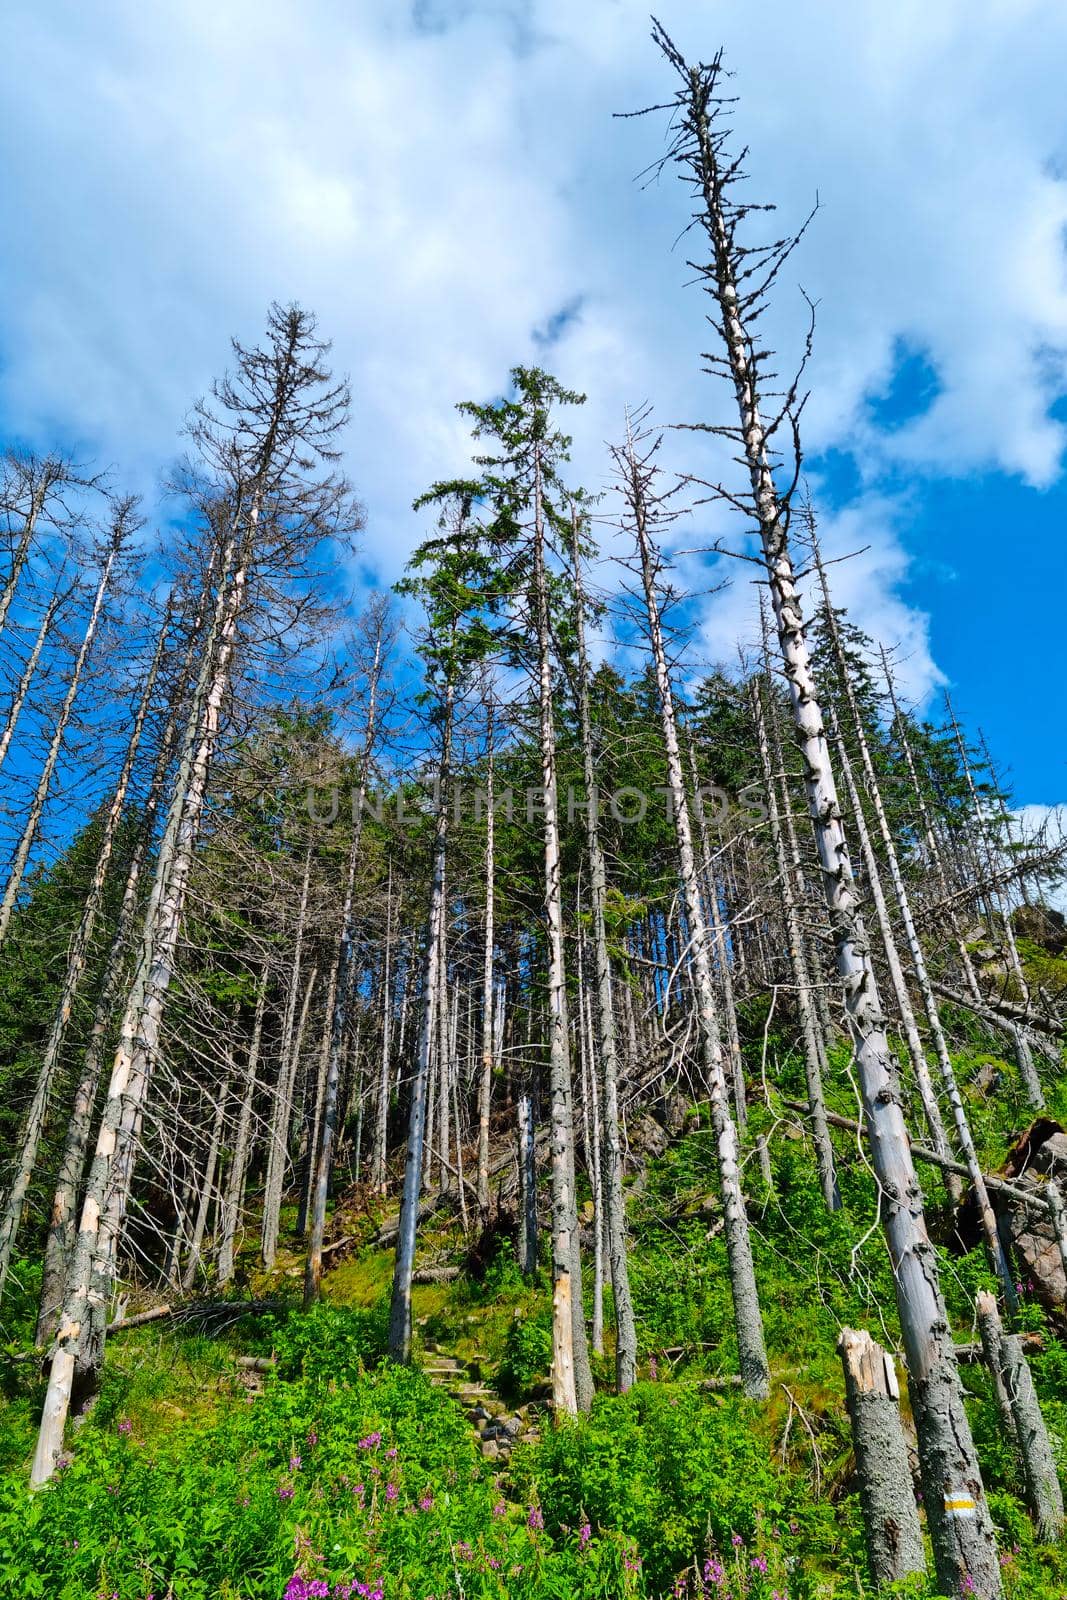 Dry spruce trees on the mountainside on a sunny day. by kip02kas